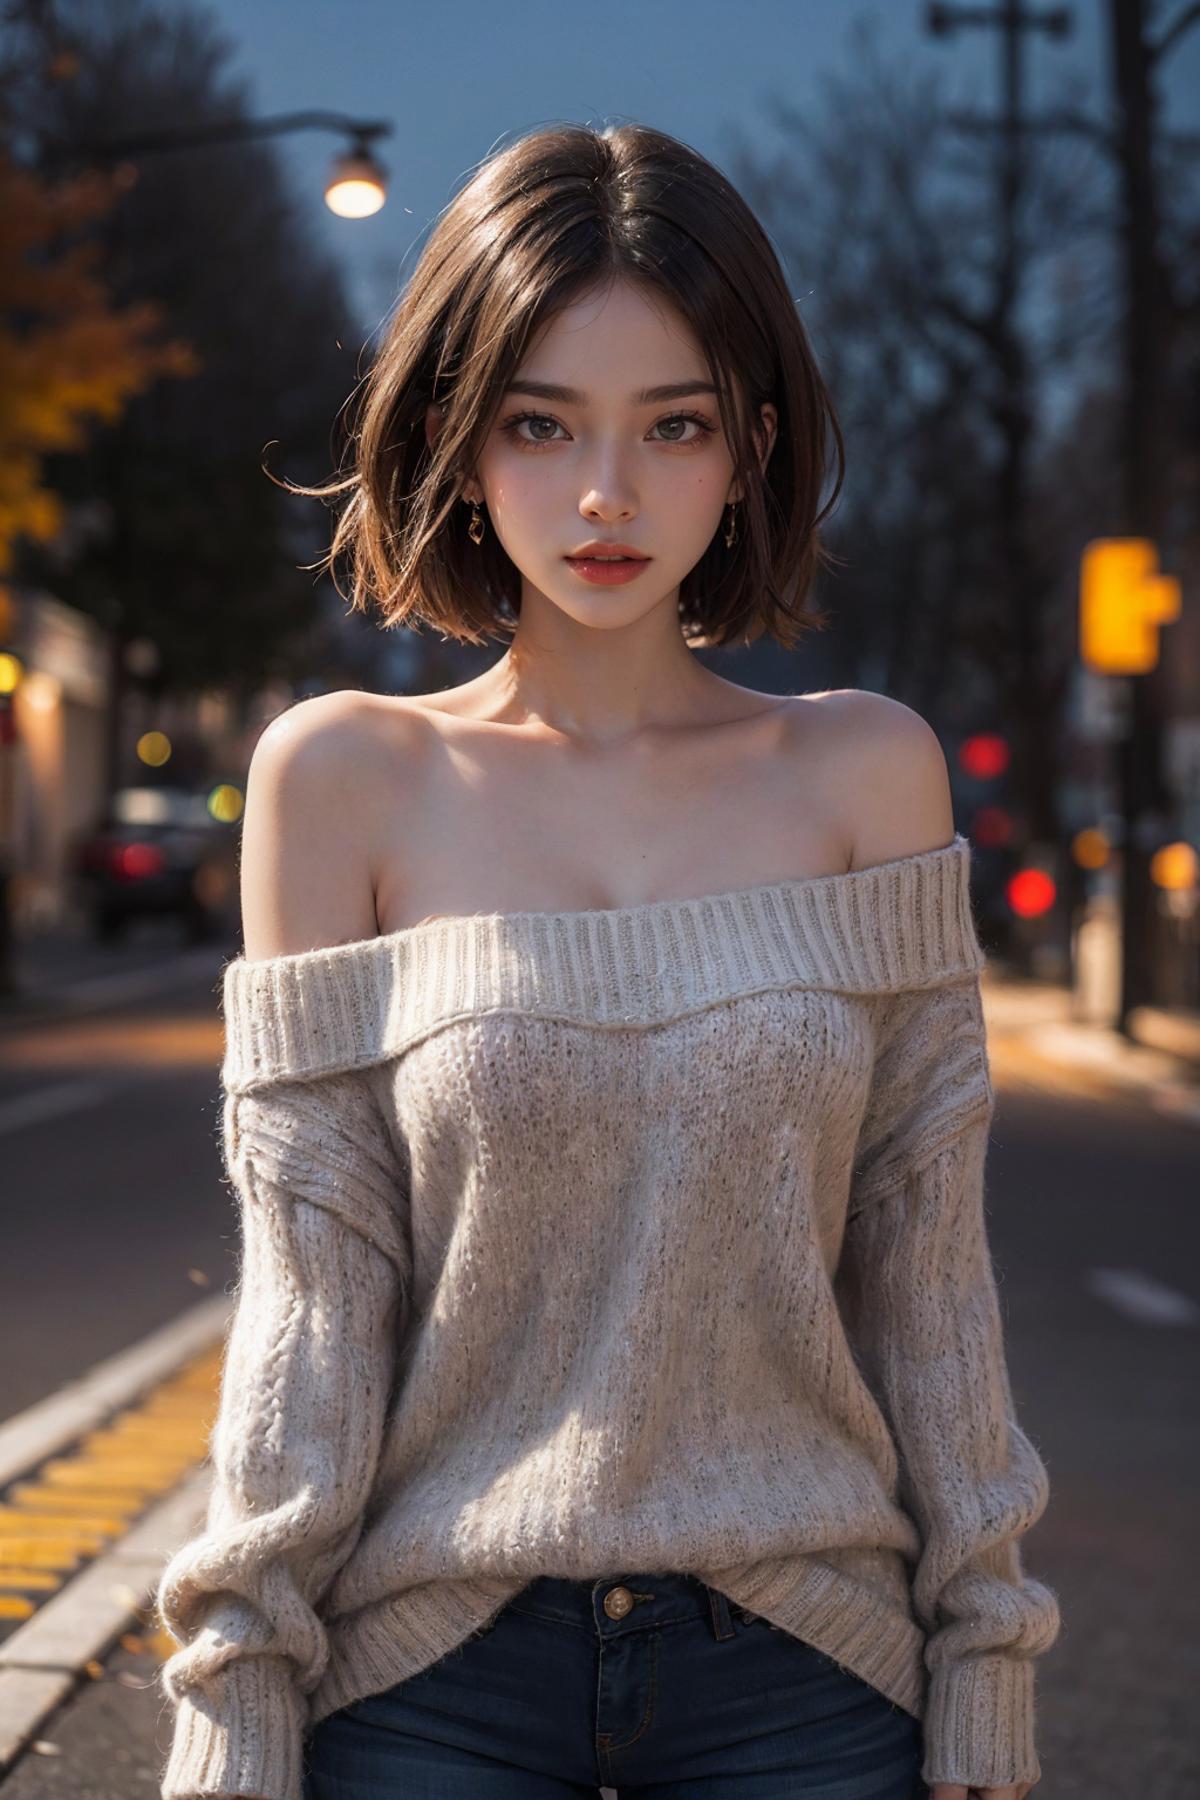 A woman wearing a white sweater posing for a picture on the street.